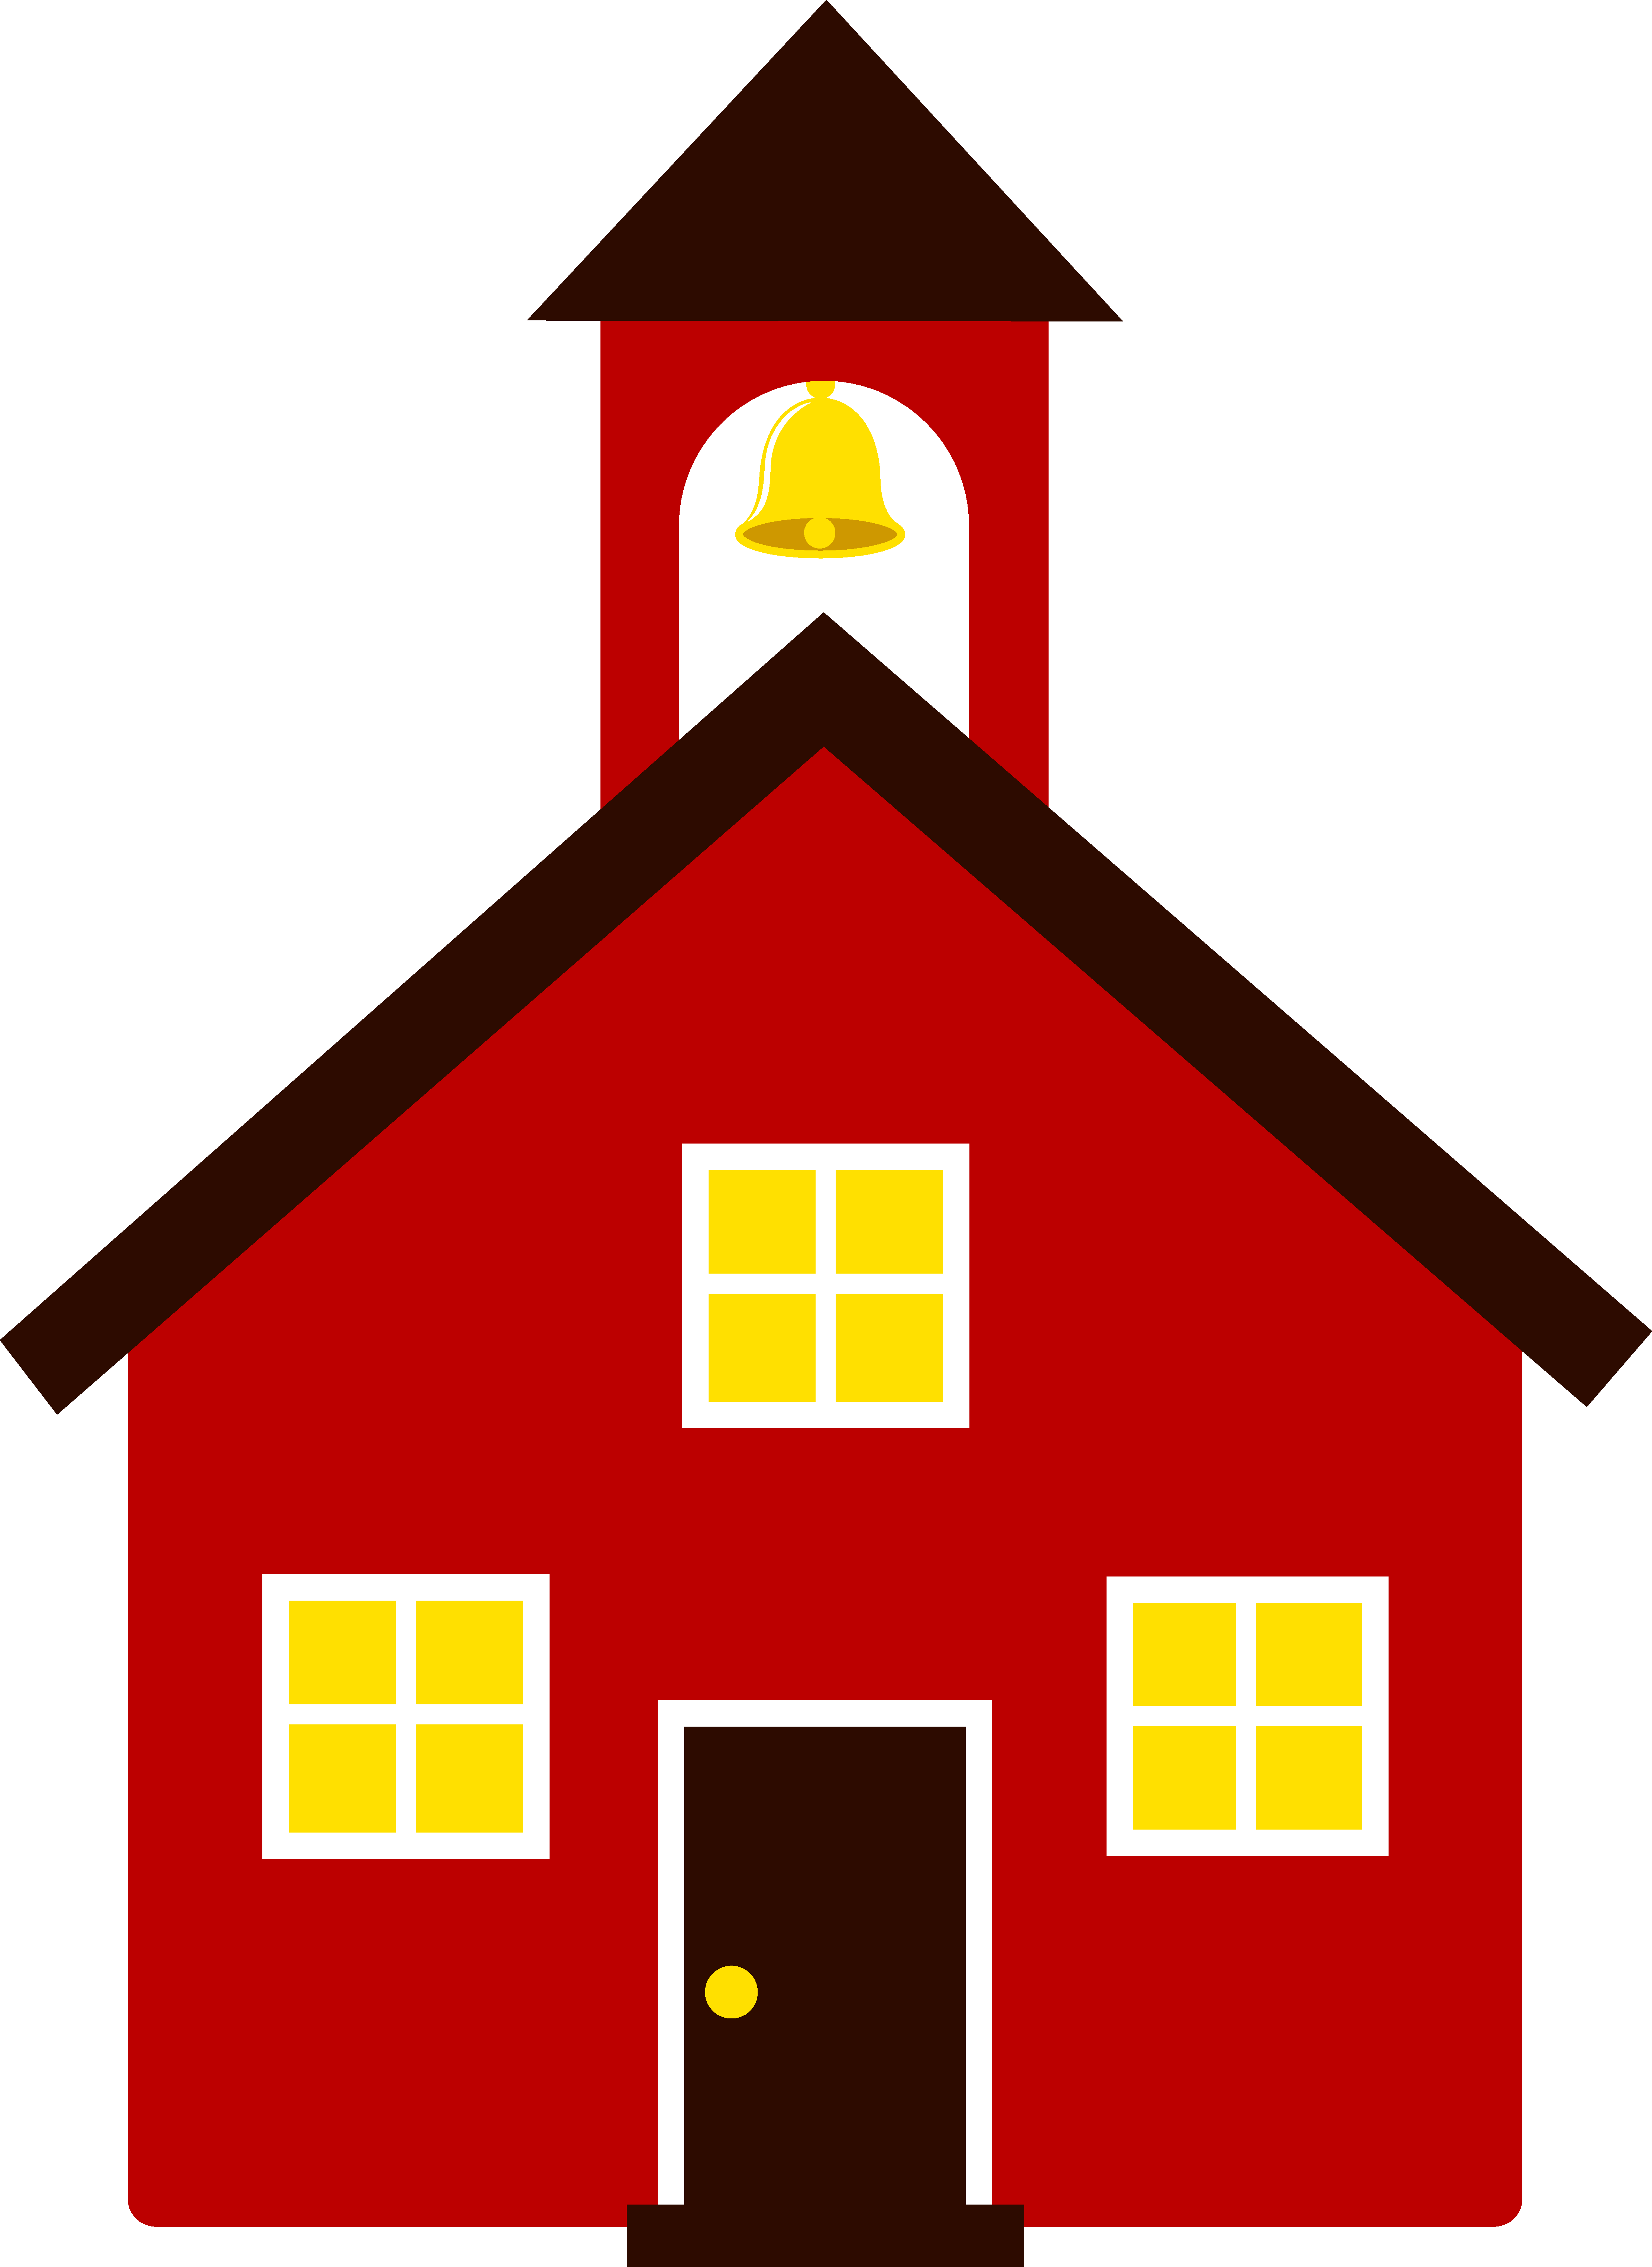 Picture Of A School House | Free Download Clip Art | Free Clip Art ...